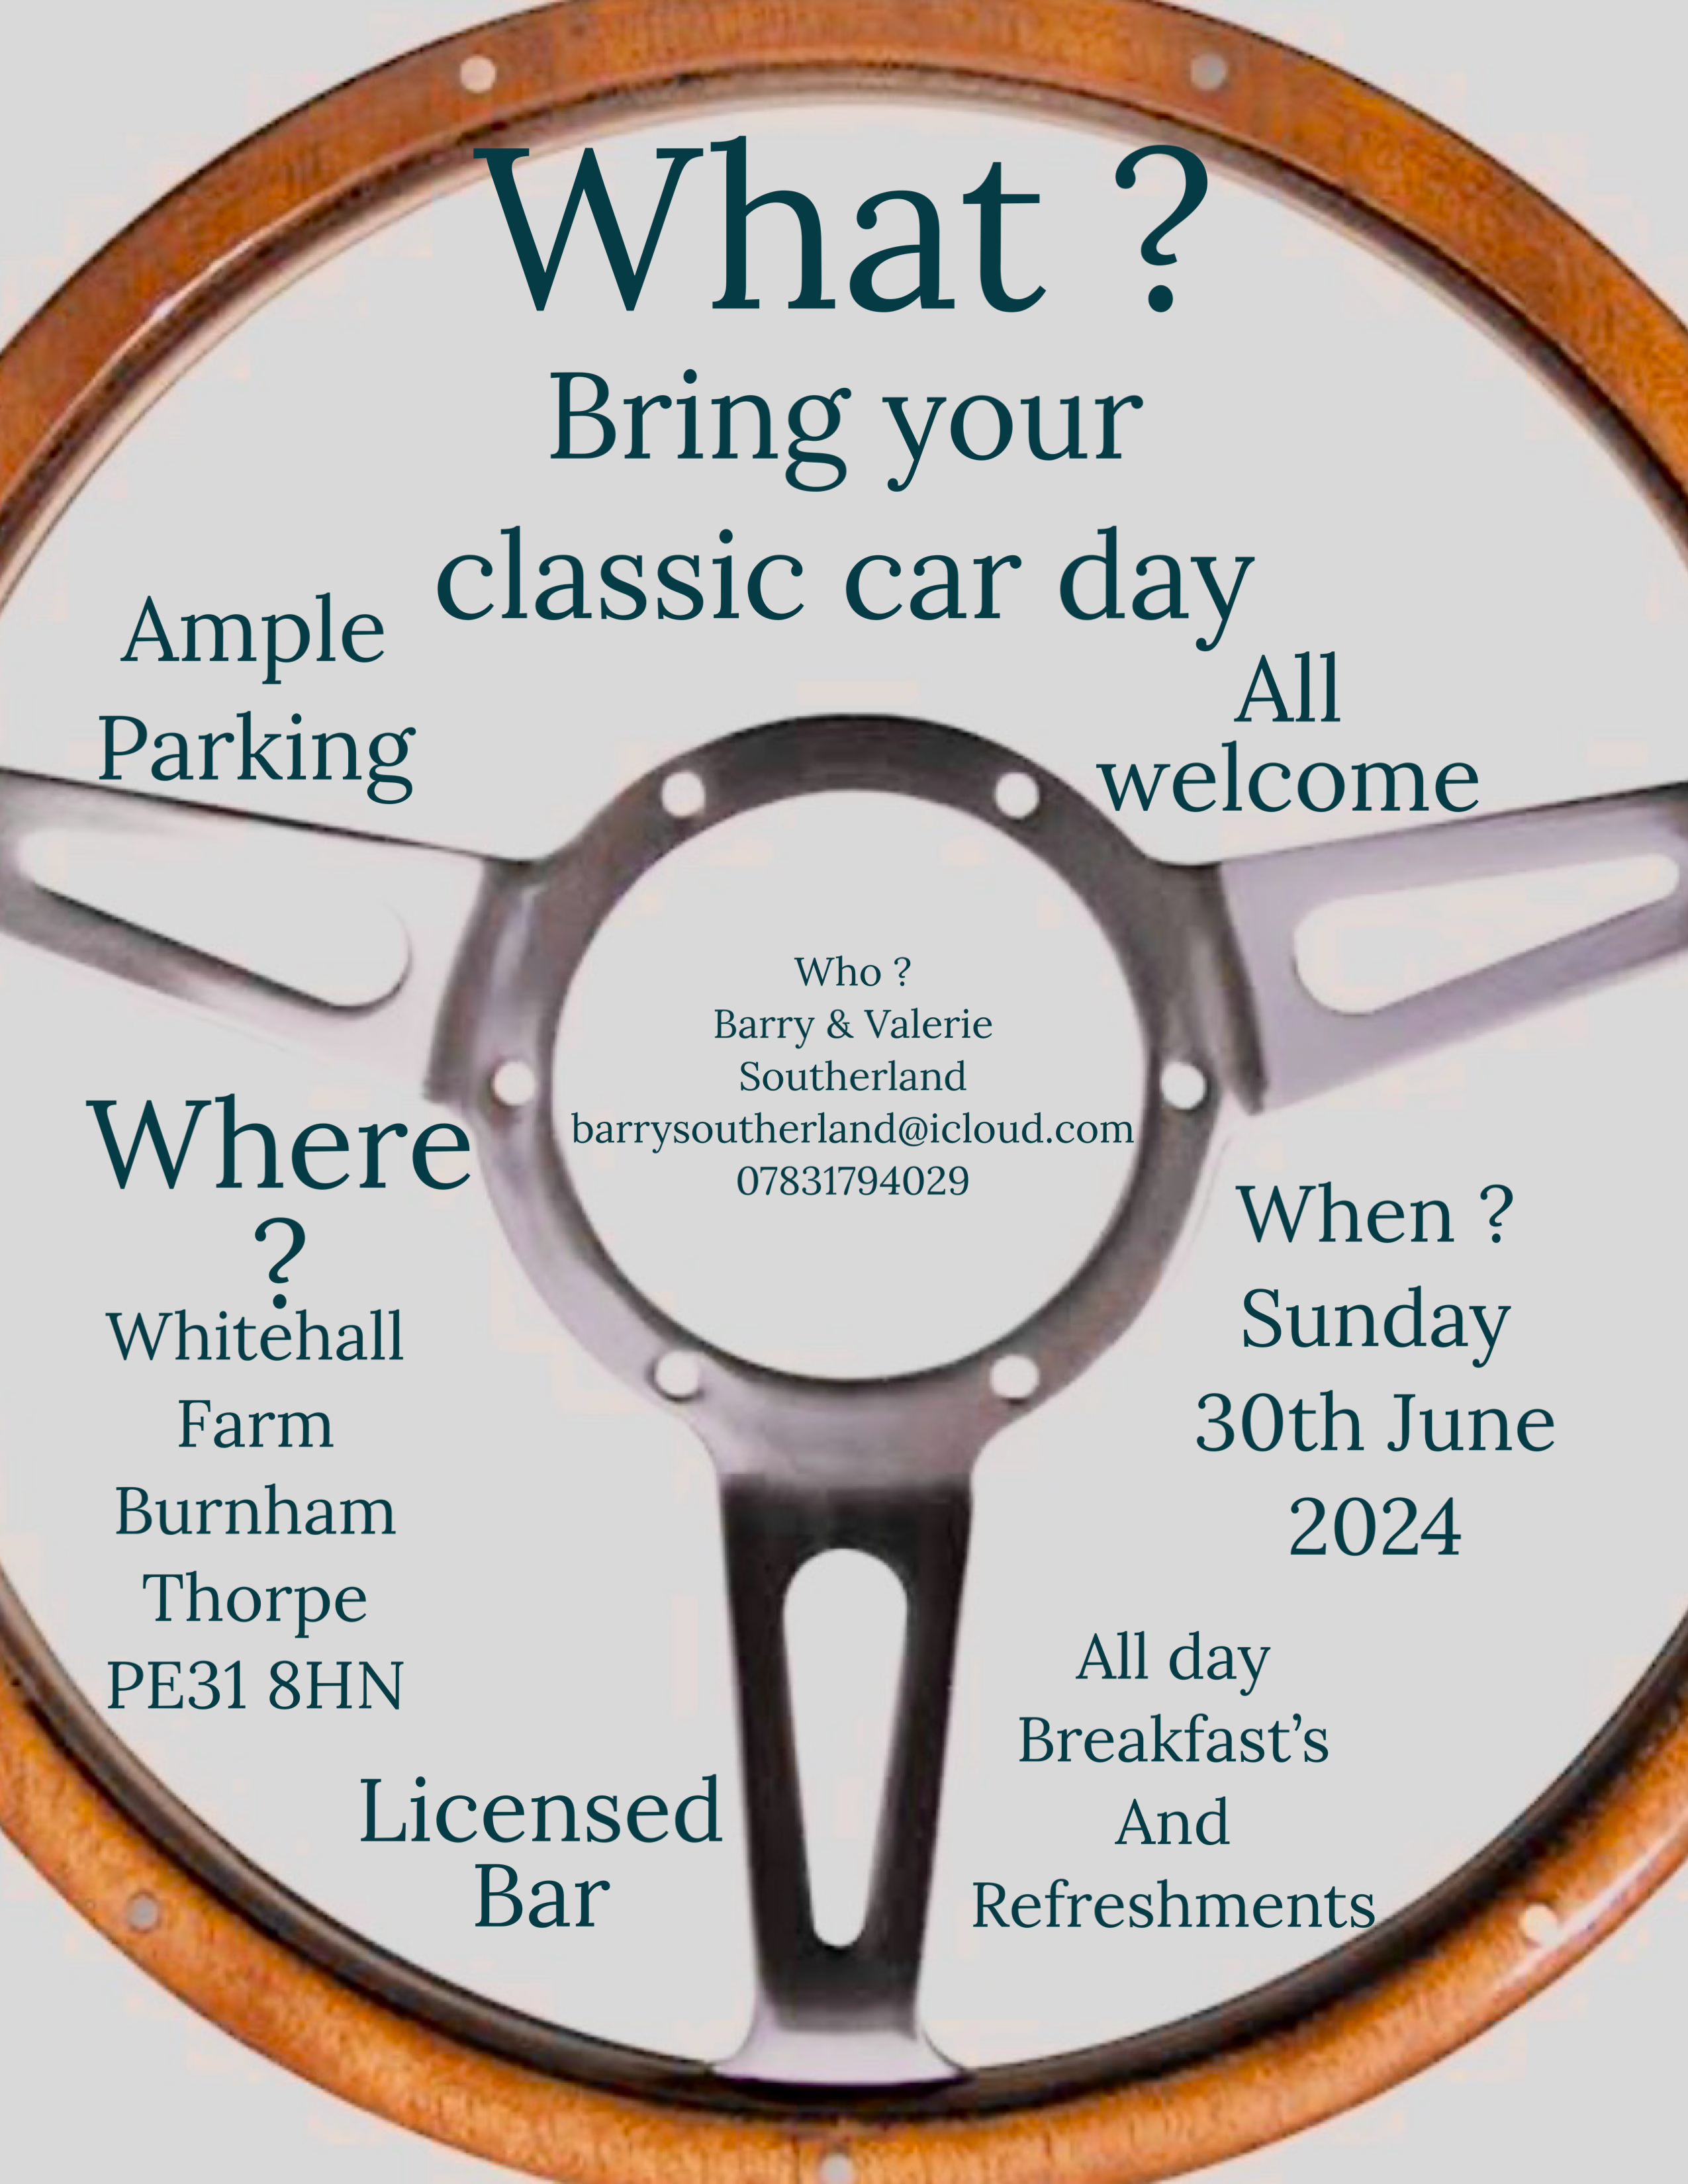 Bring Your Classic Day Evoke Classics classic cars online auction Events